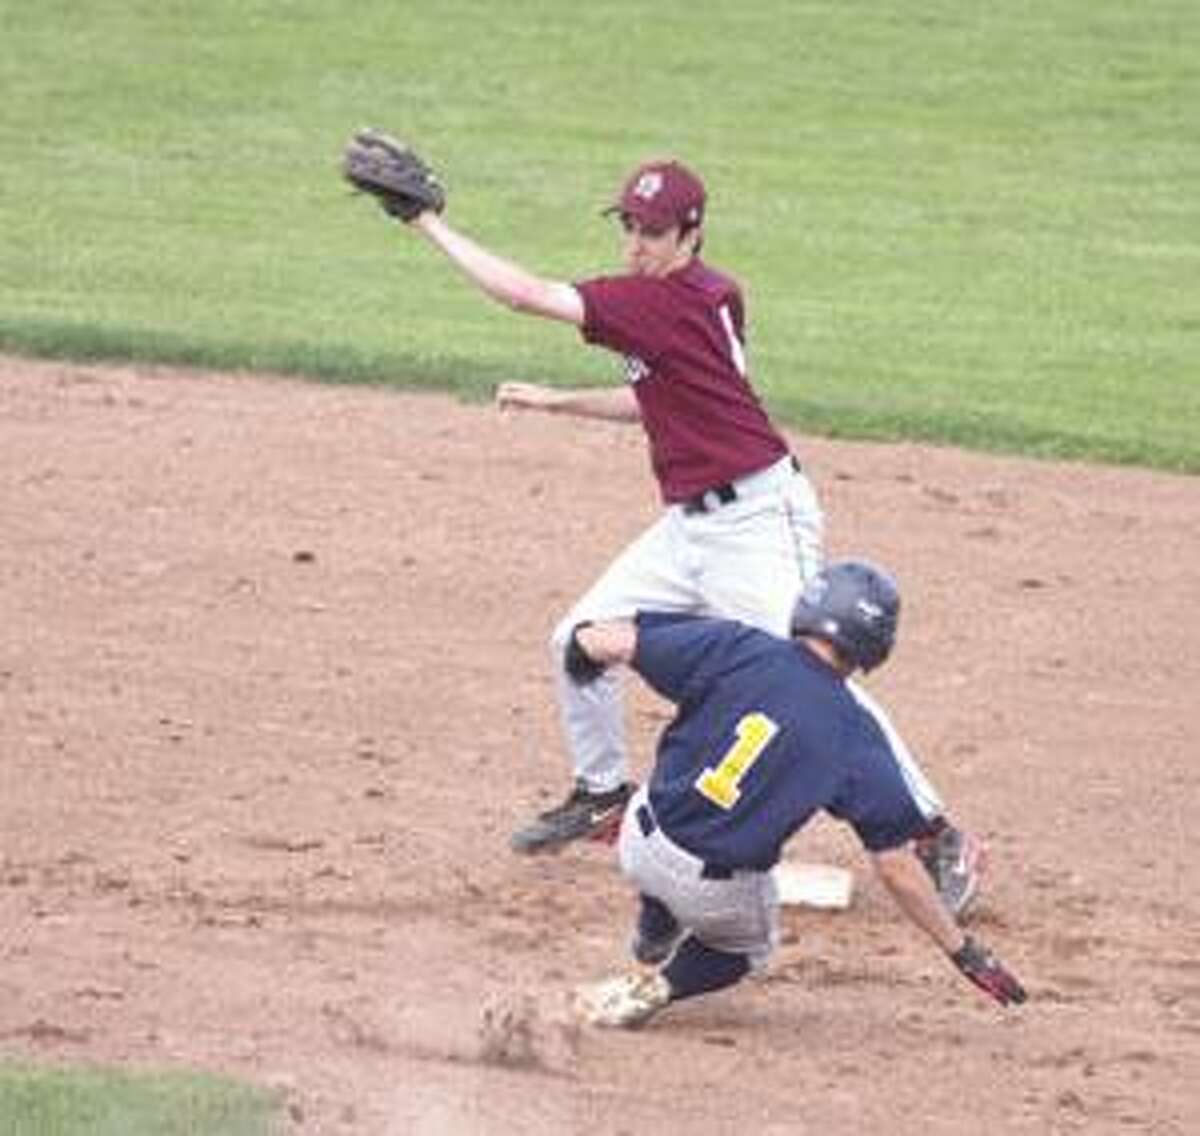 Torrington's Jimmy Fuchsman tries for the tag as Kennedy's James McMahon slides safely into second.